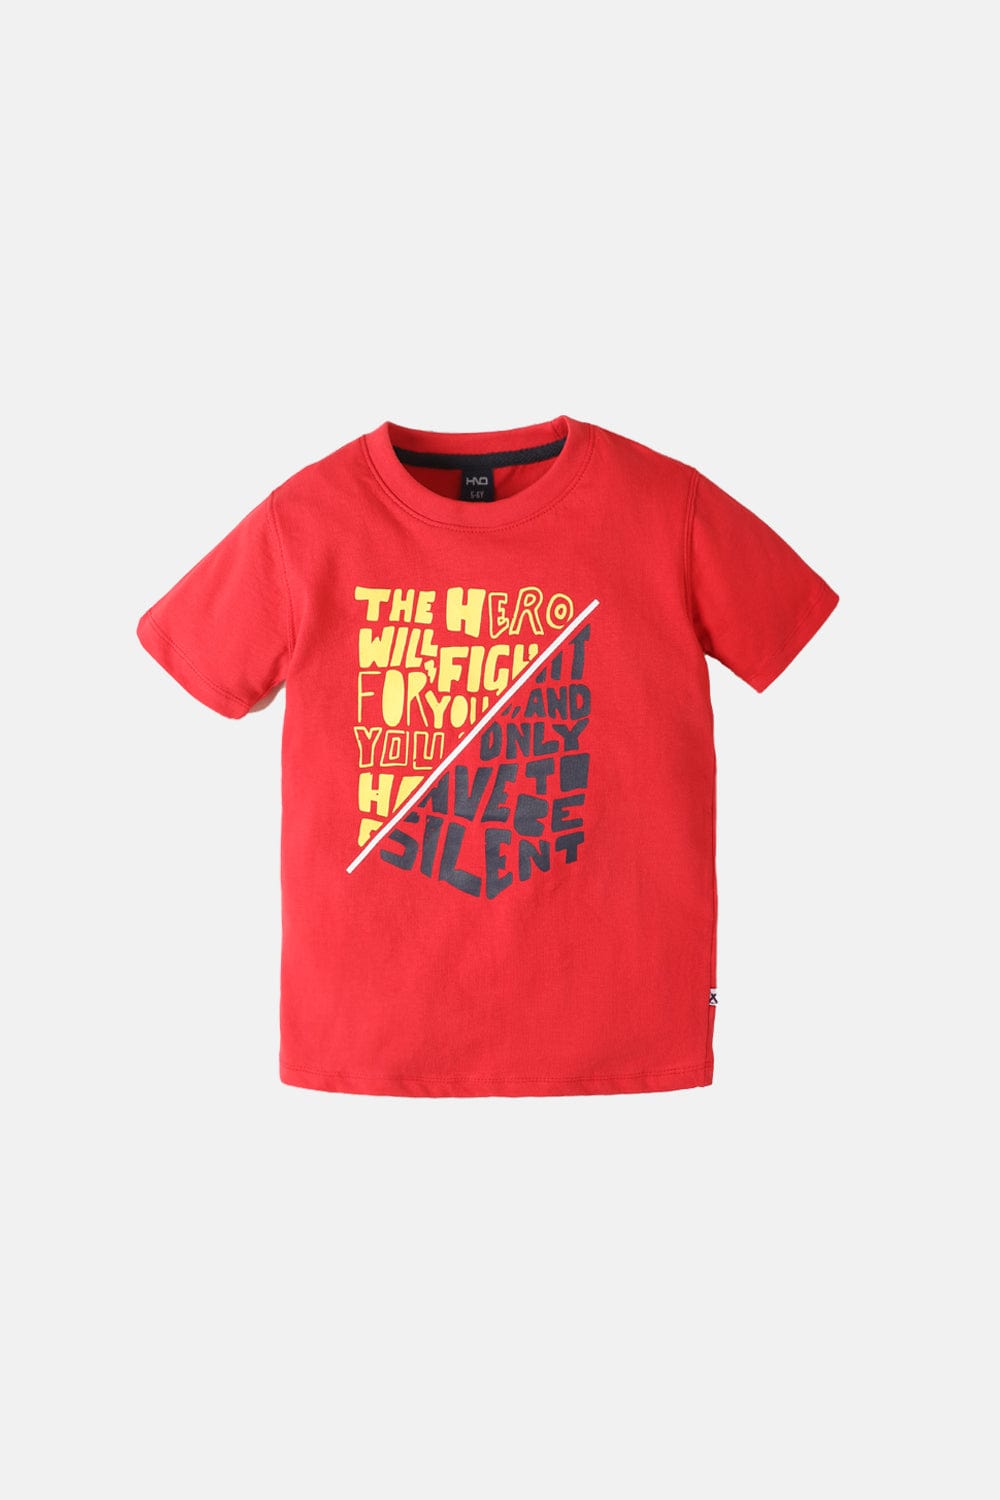 Hope Not Out by Shahid Afridi Boys Knit T-Shirt The Hero Red Graphic Print T-Shirt